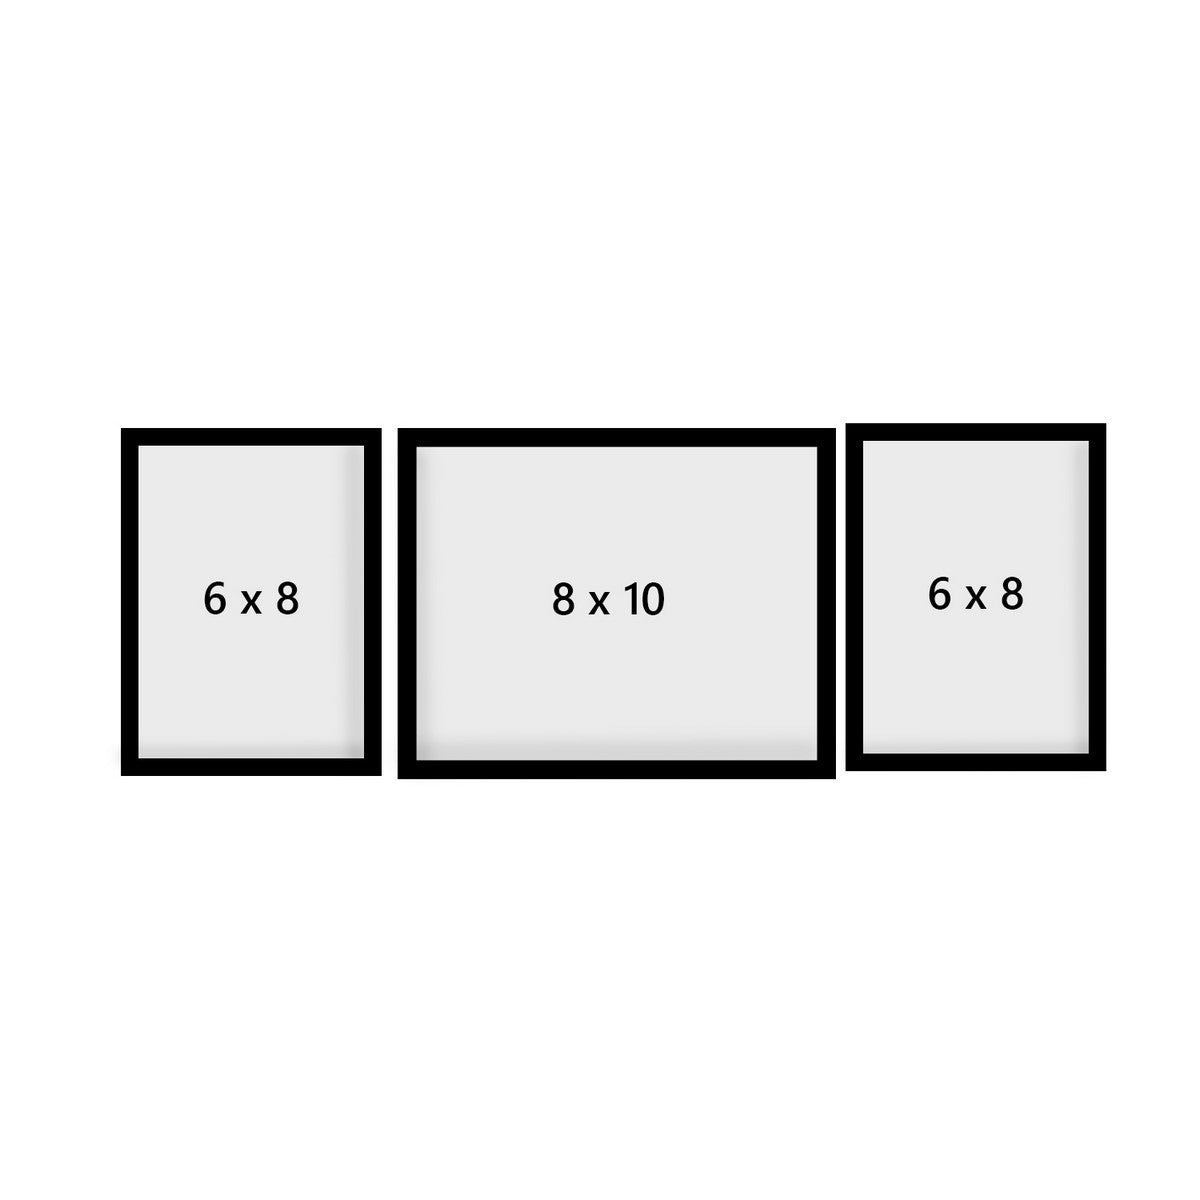 Memory Wall Collage Photo Frame - Set of 3 Photo Frames for 2 Photos of 6"x8", 1 Photos of 8"x10" 3